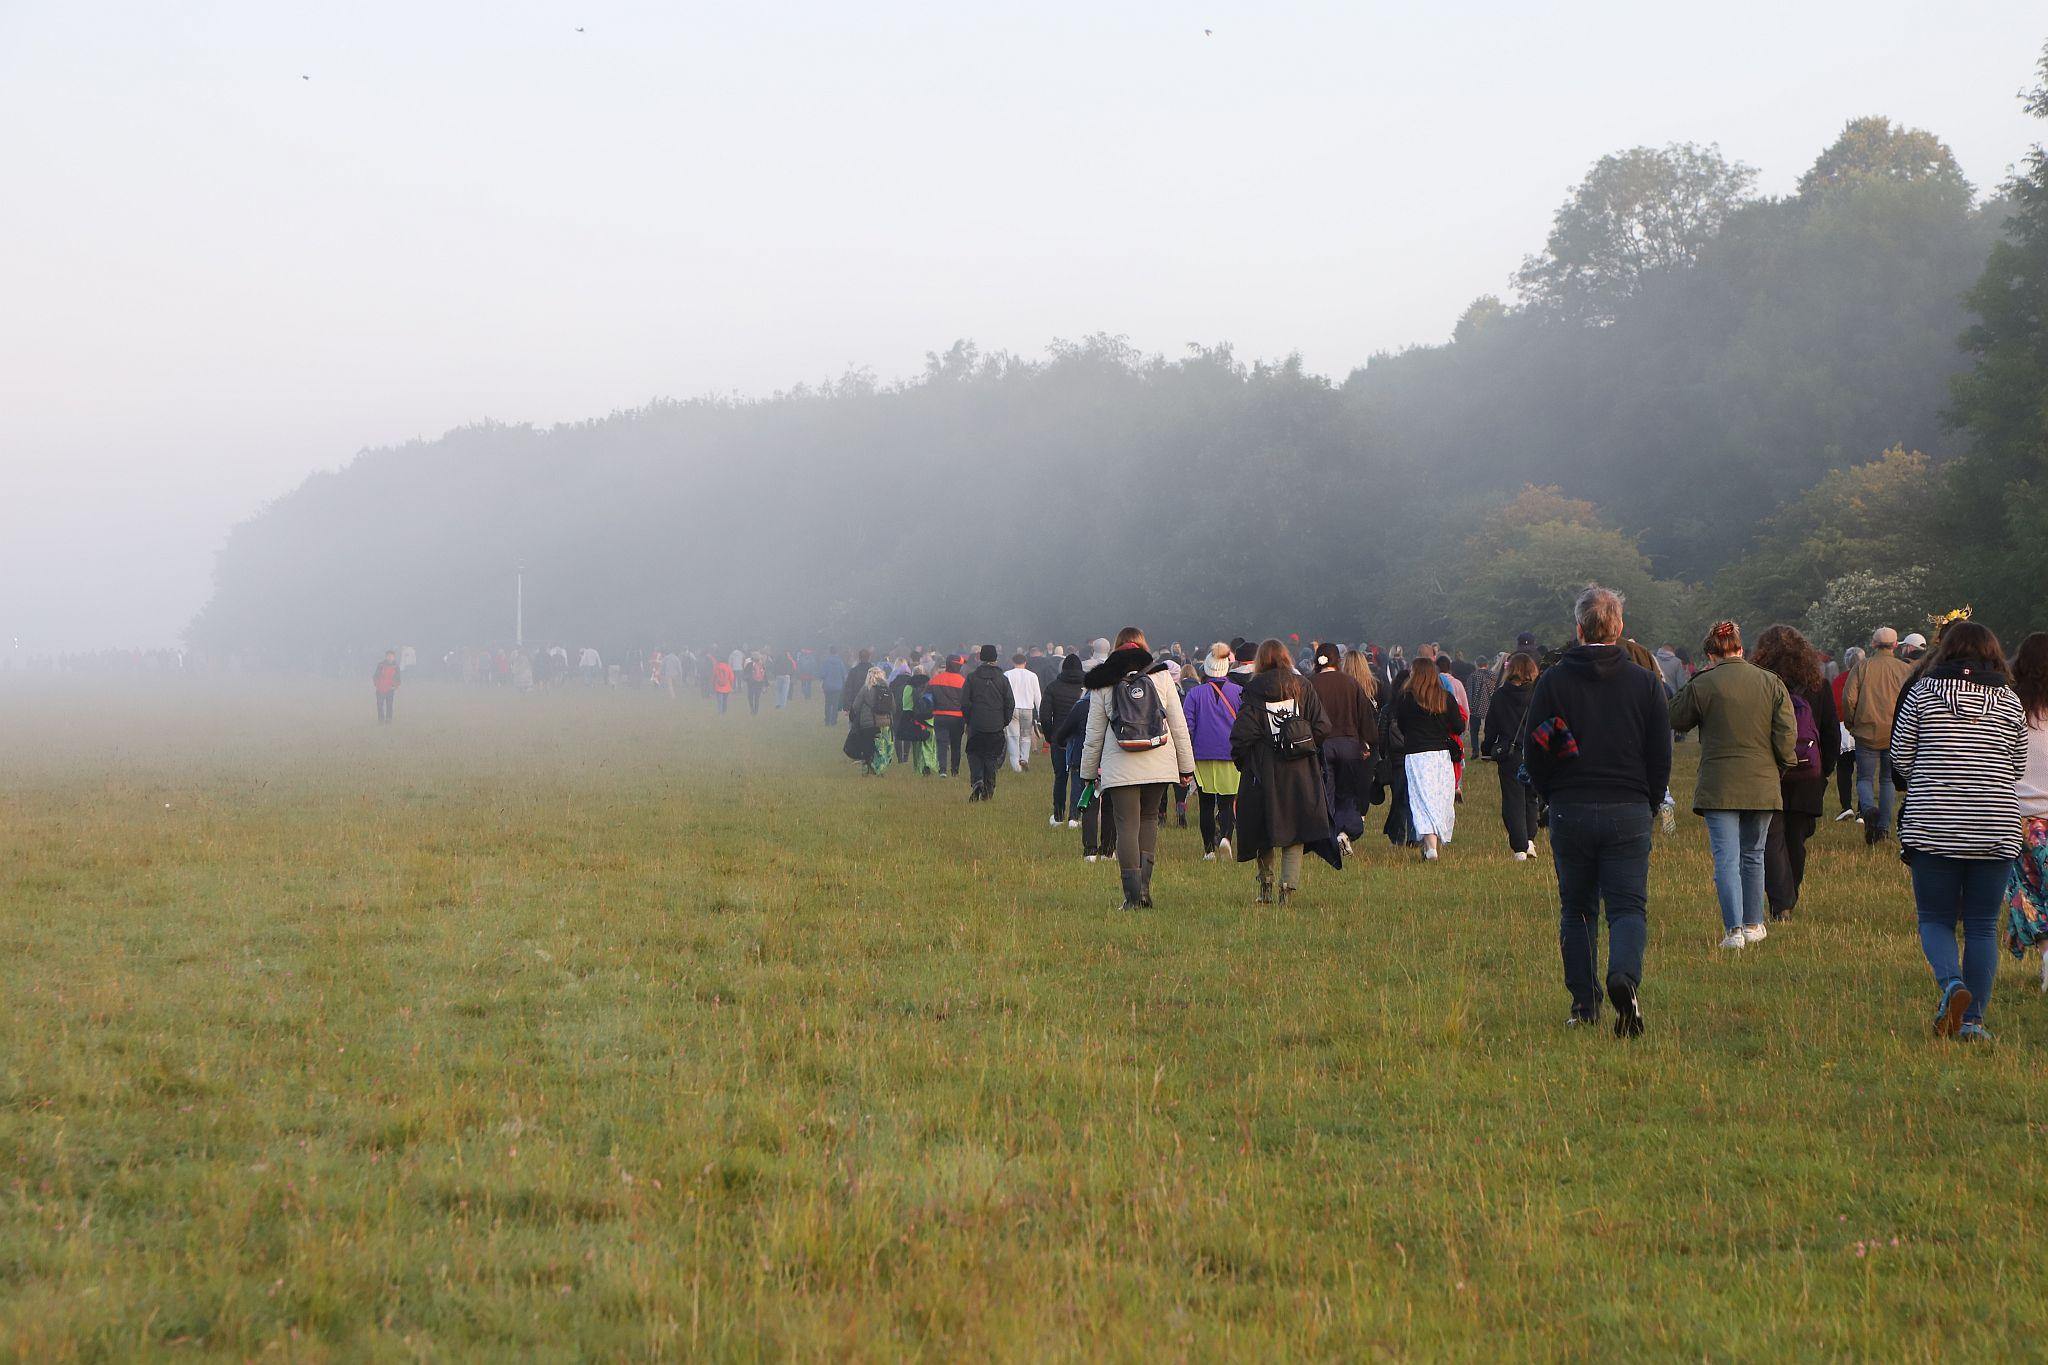 The crowd heading back to the Visitors Centre after dawn. The 2023 Summer Solstice longest day at Stonehenge in Wiltshire, UK. Photo taken 21-Jun-2023.